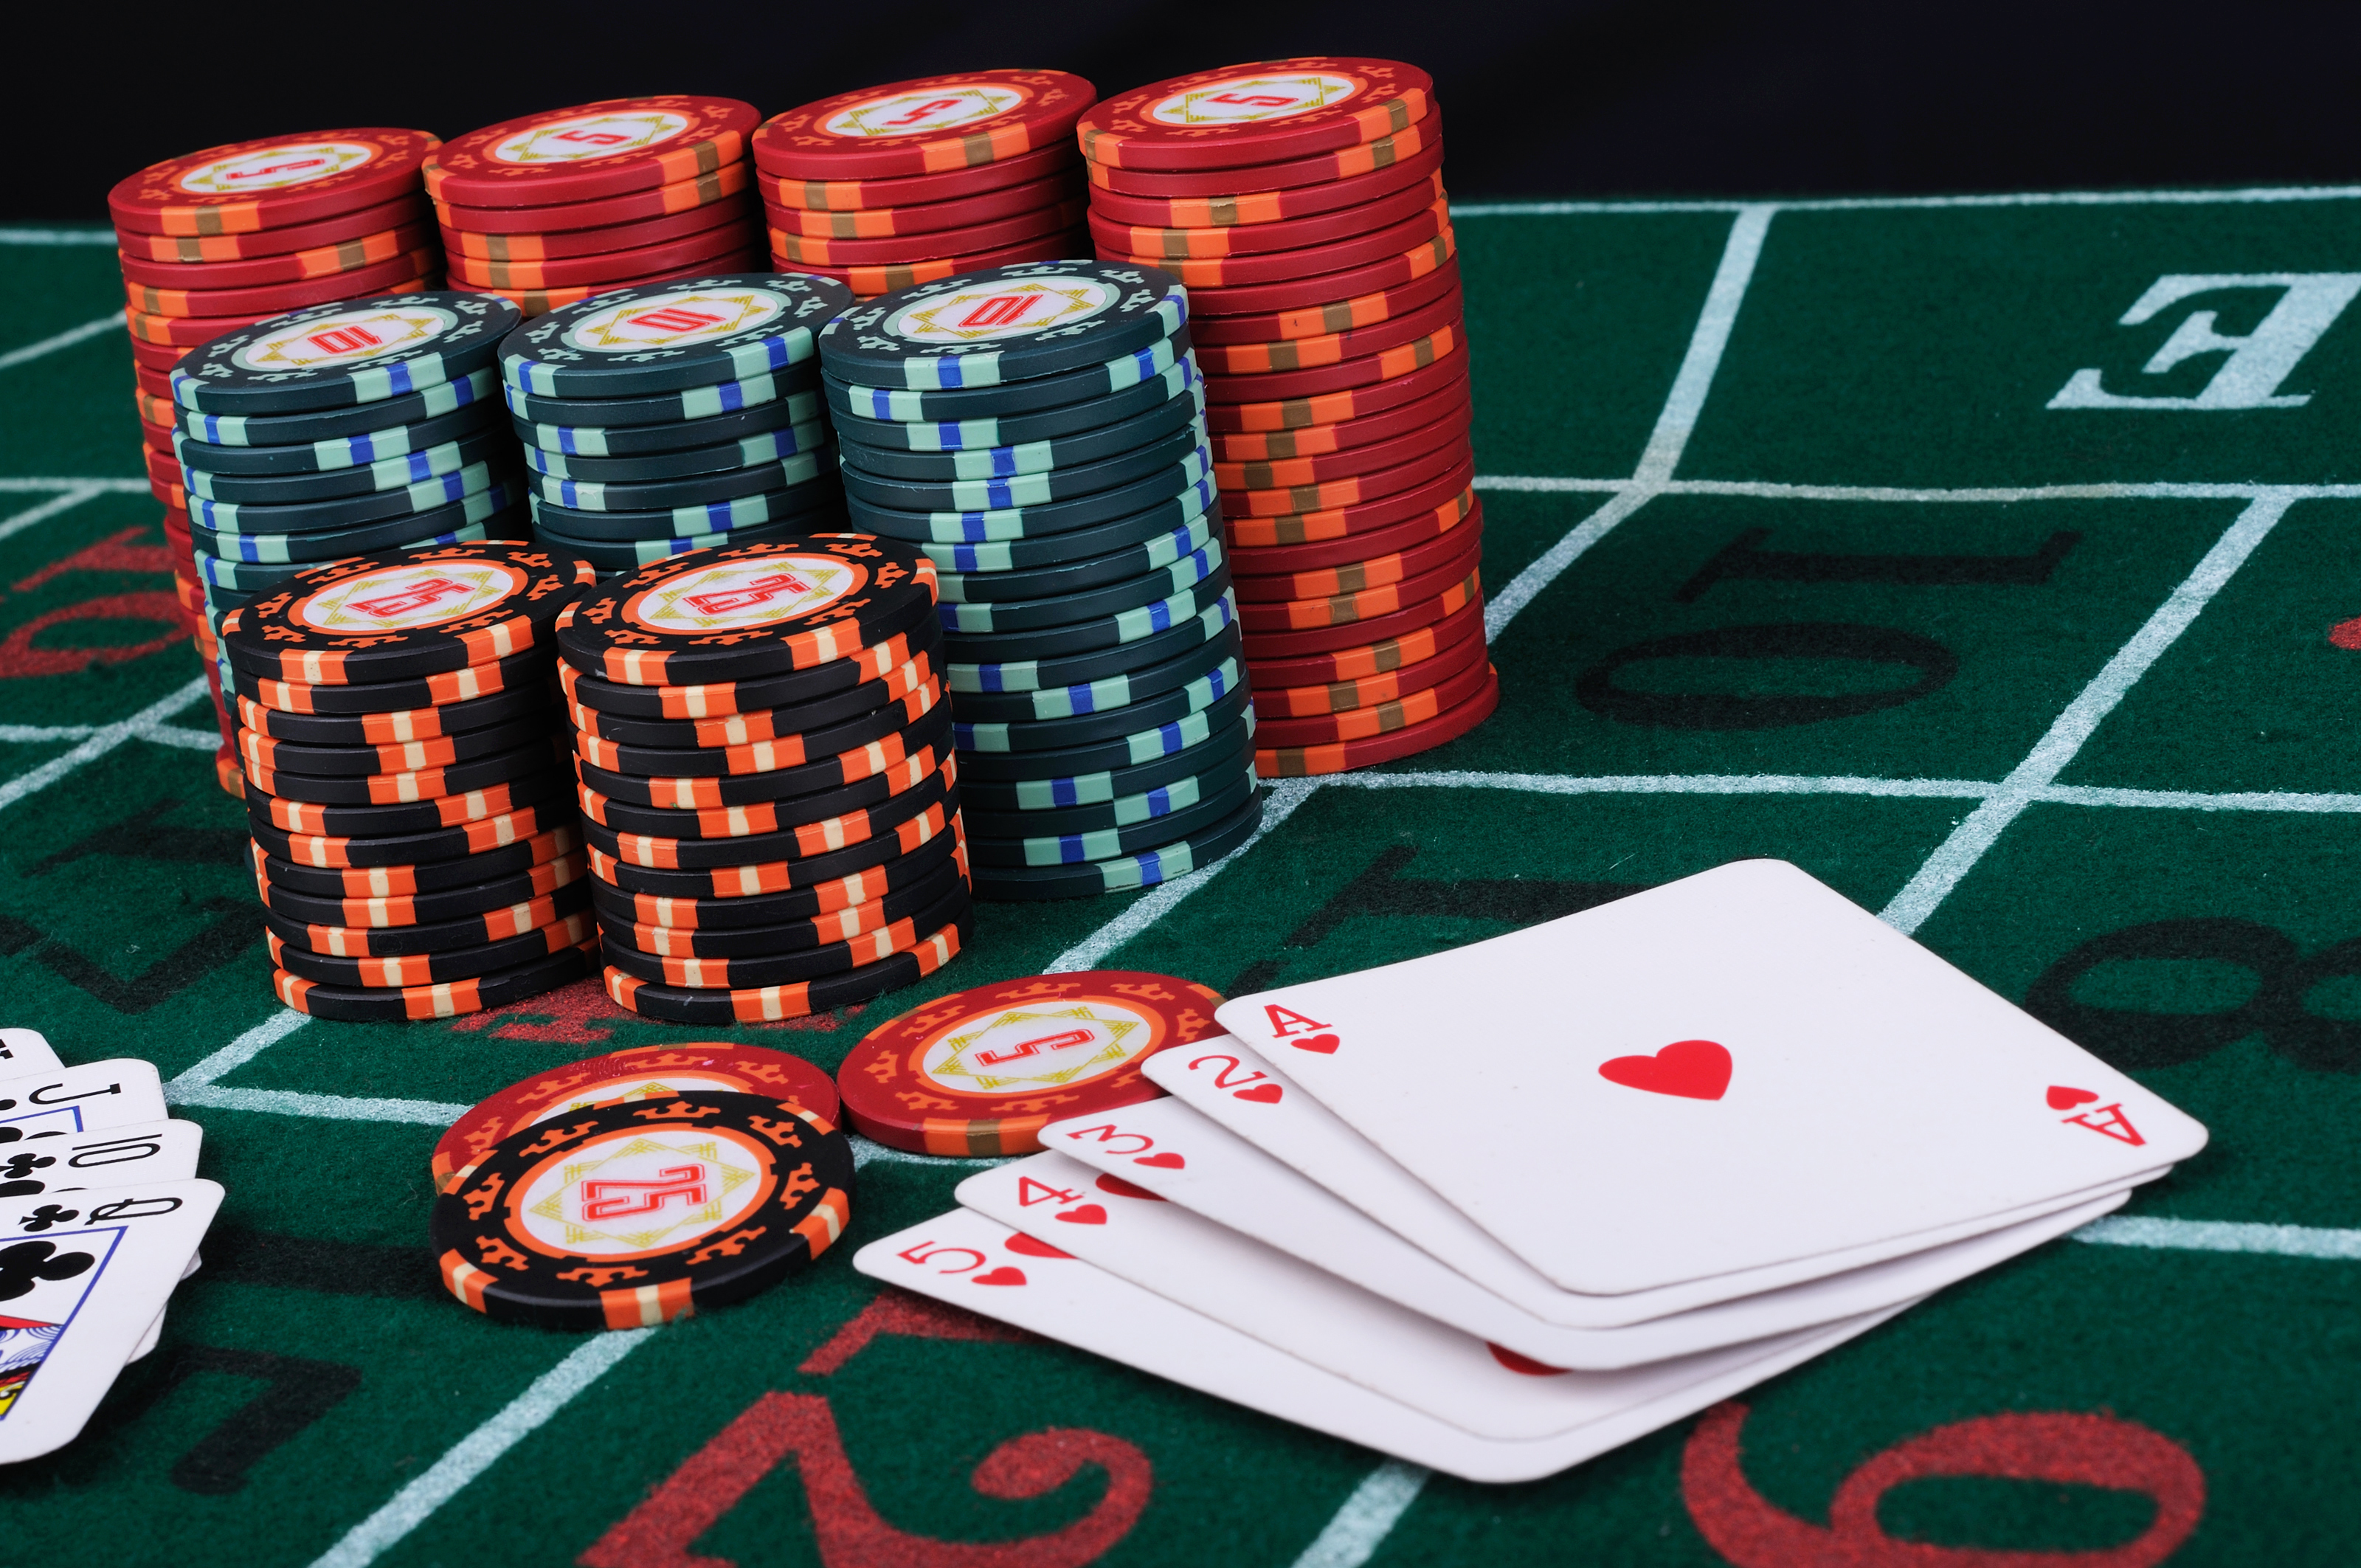 Free legal online casino in usa